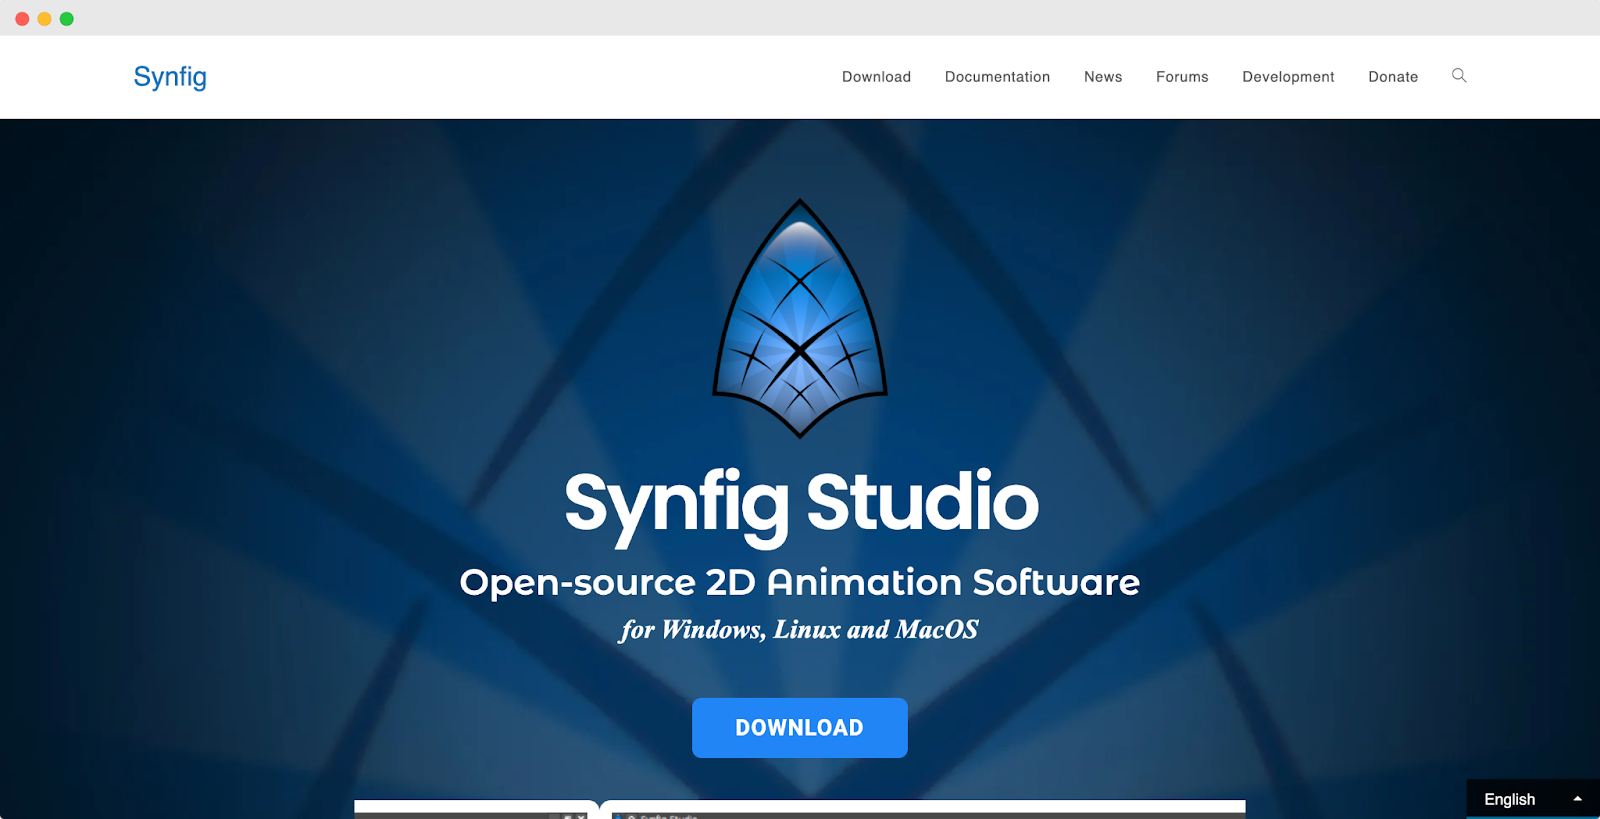 Synfig Studio landing page